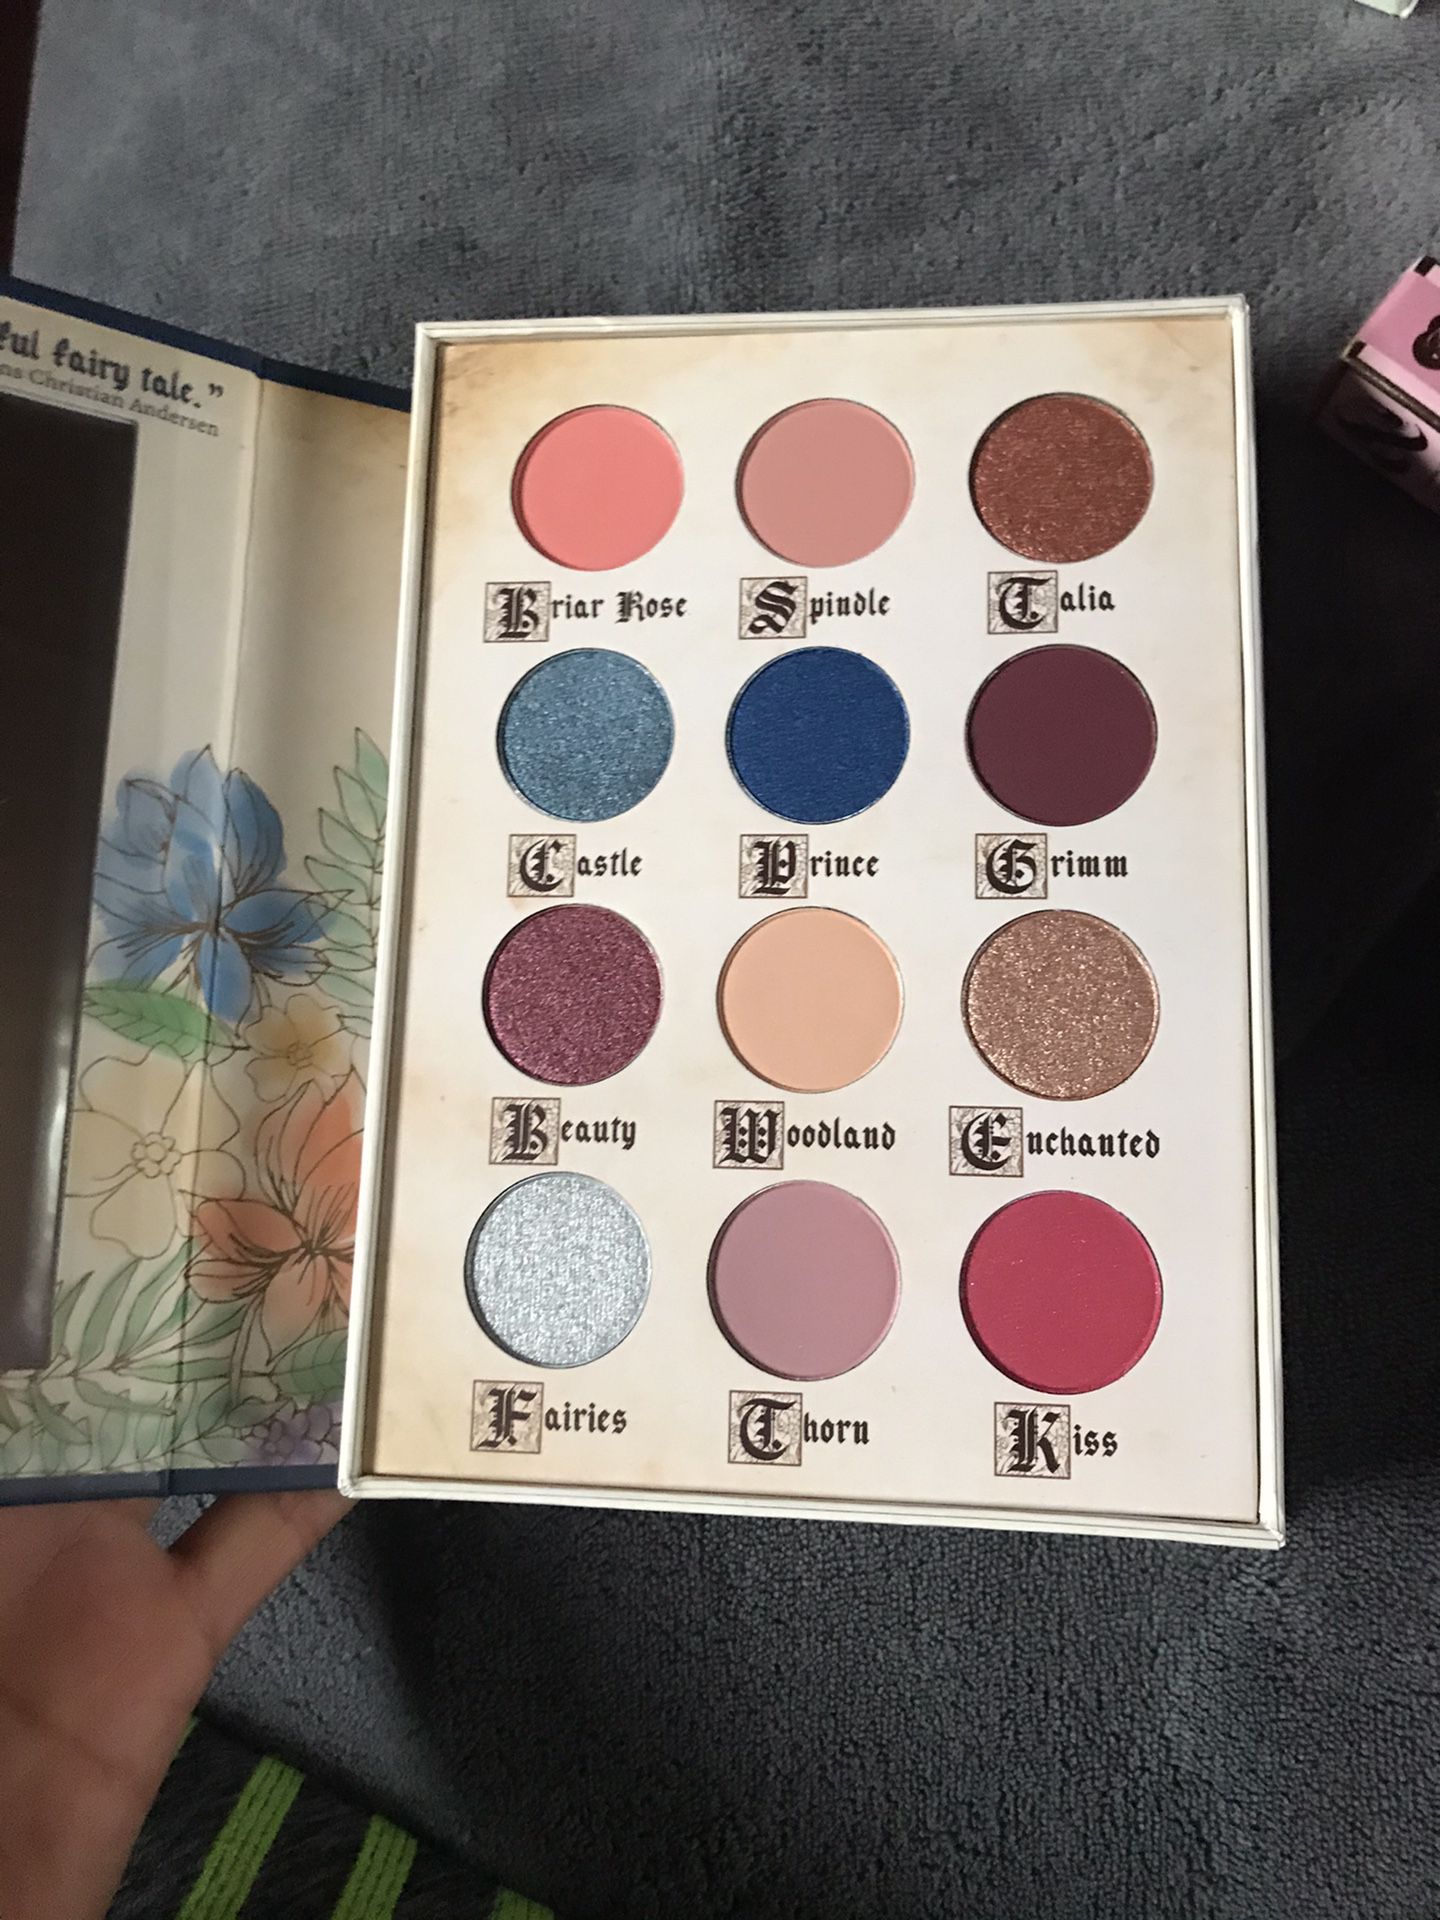 Fairy tales story book cosmetics